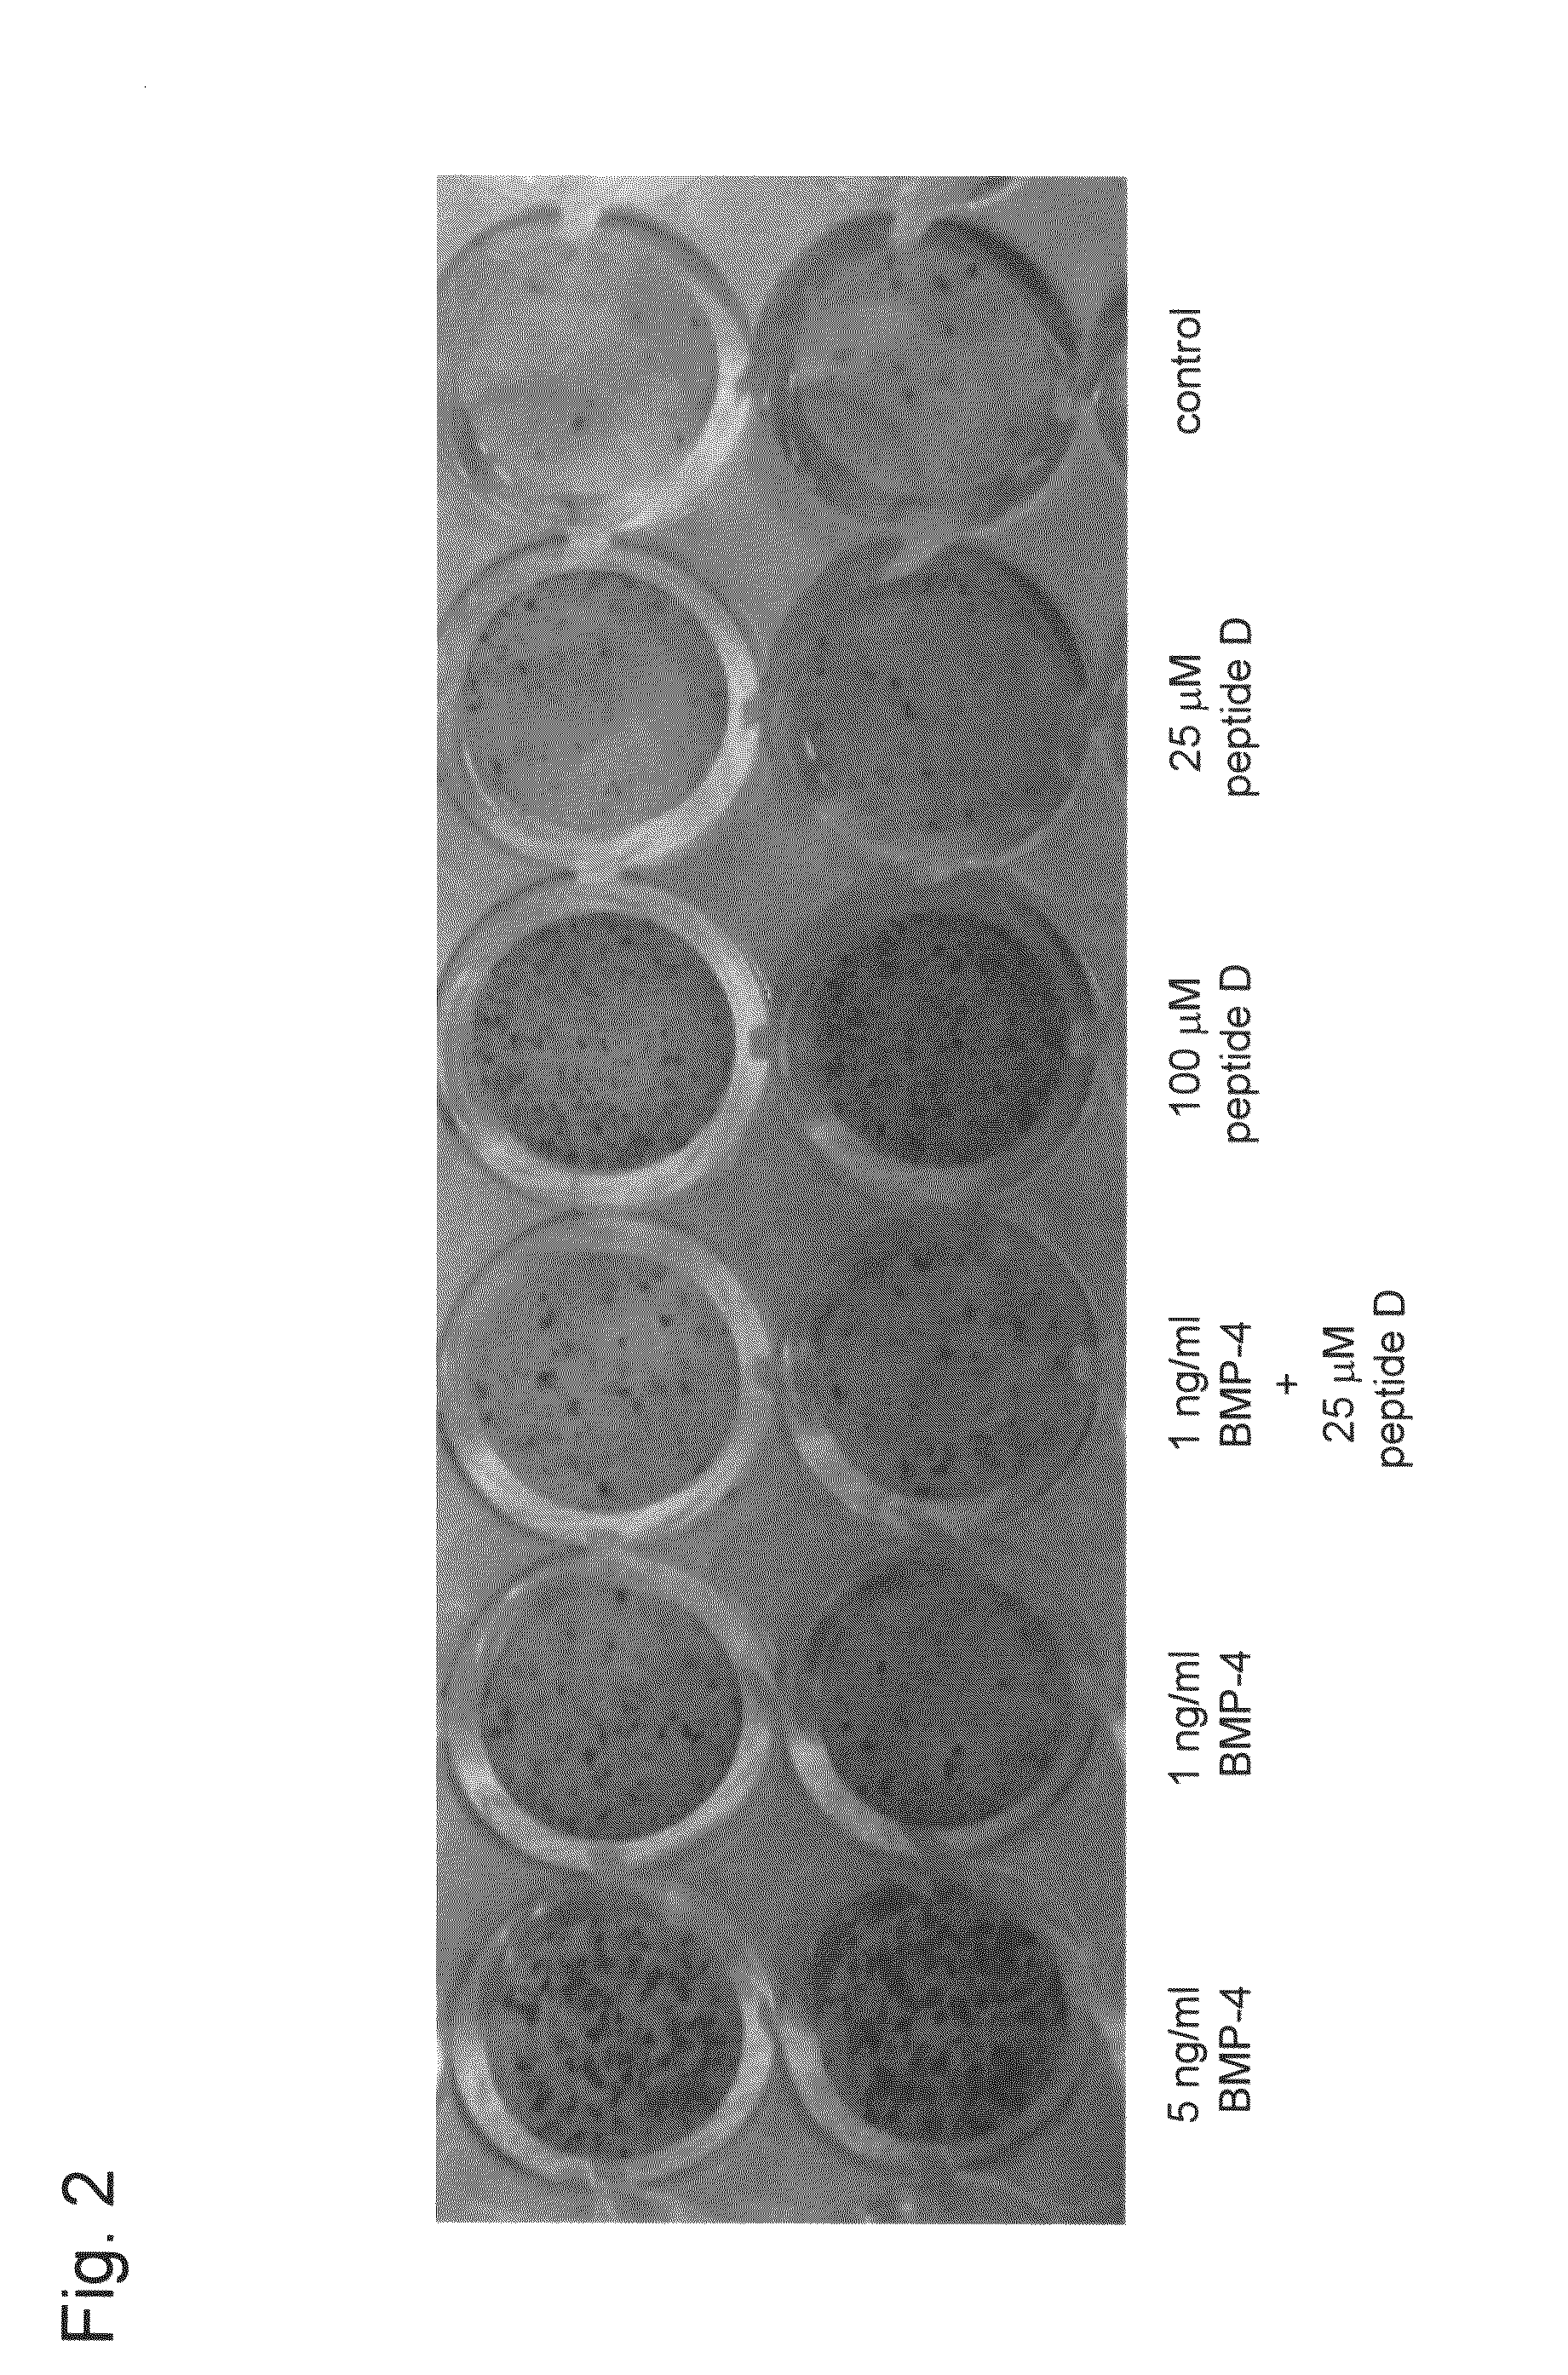 Inducer of chondrocyte proliferation and differentiation